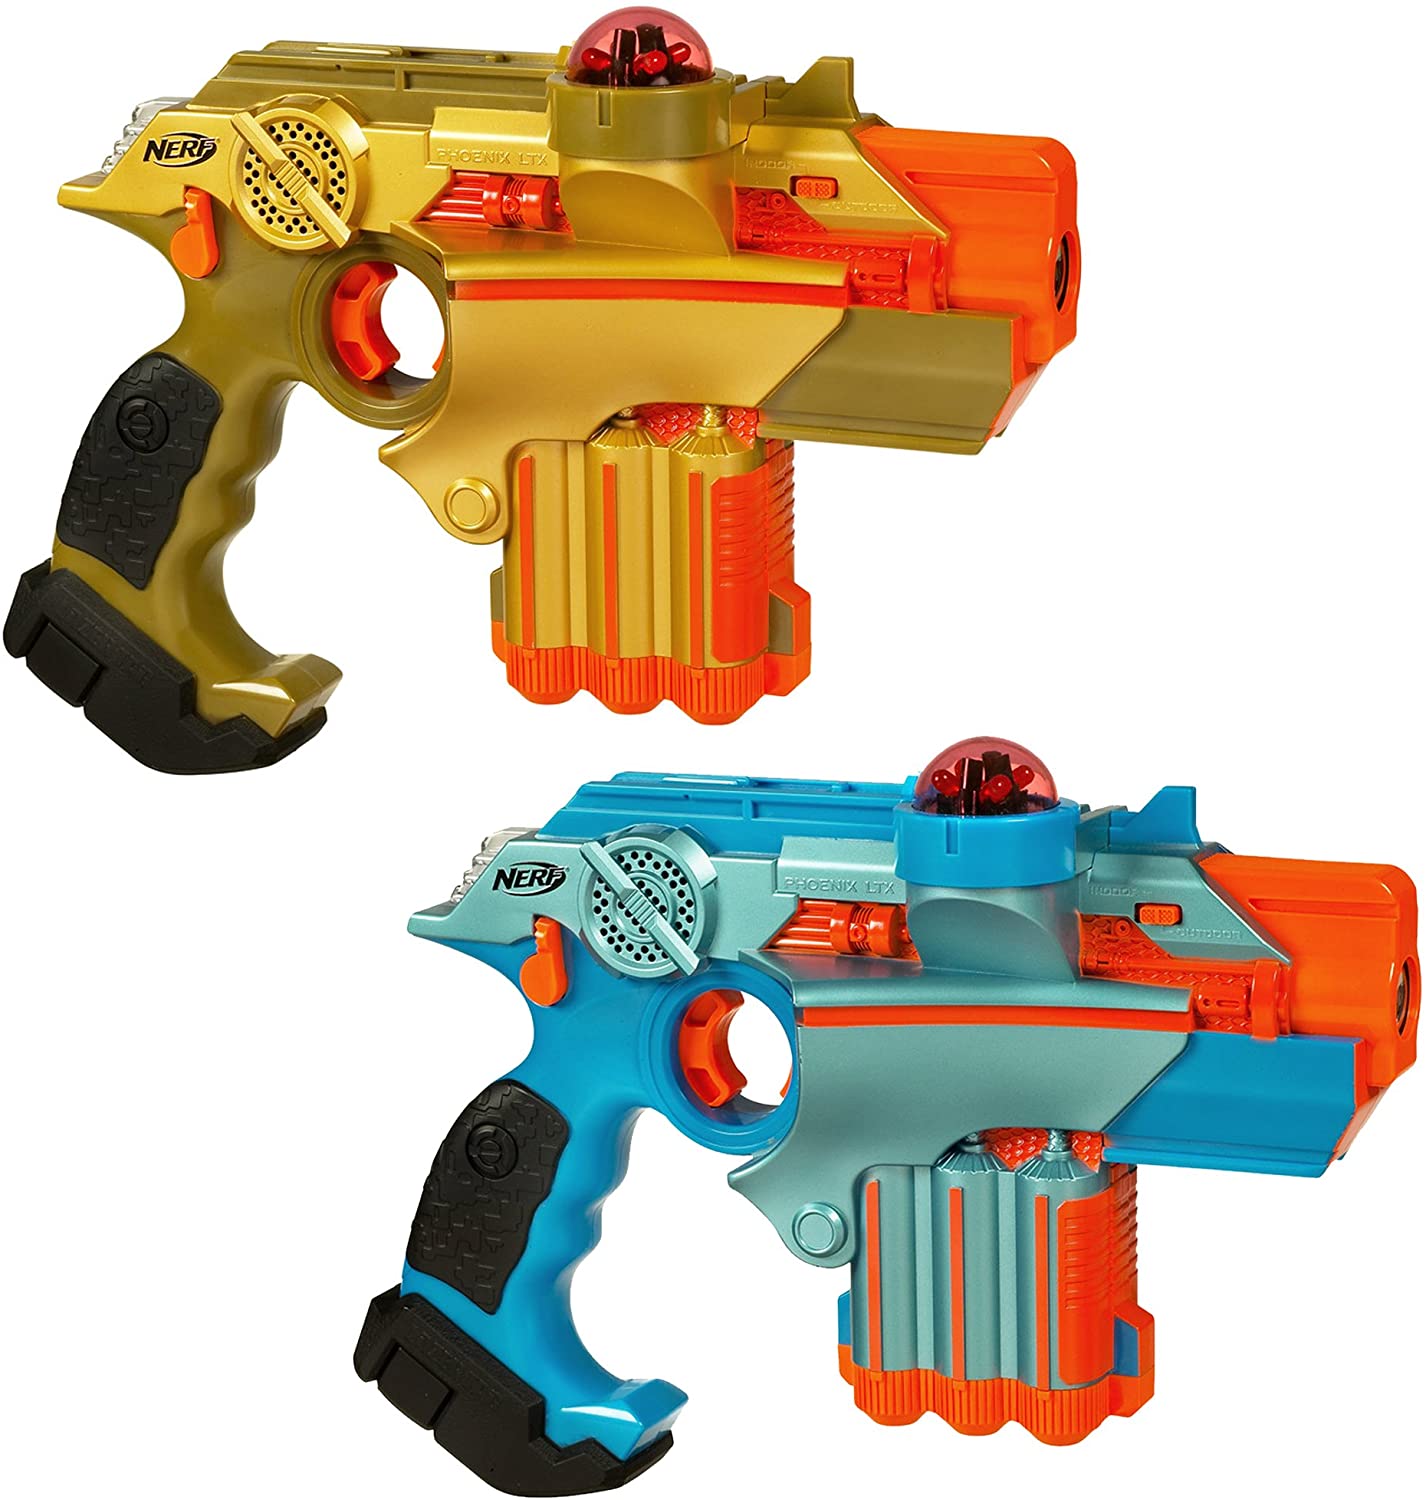 2-Pack Nerf Lazer Tag Phoenix LTX Taggers $24.99 + Free Shipping w/ Amazon Prime or Orders $25+